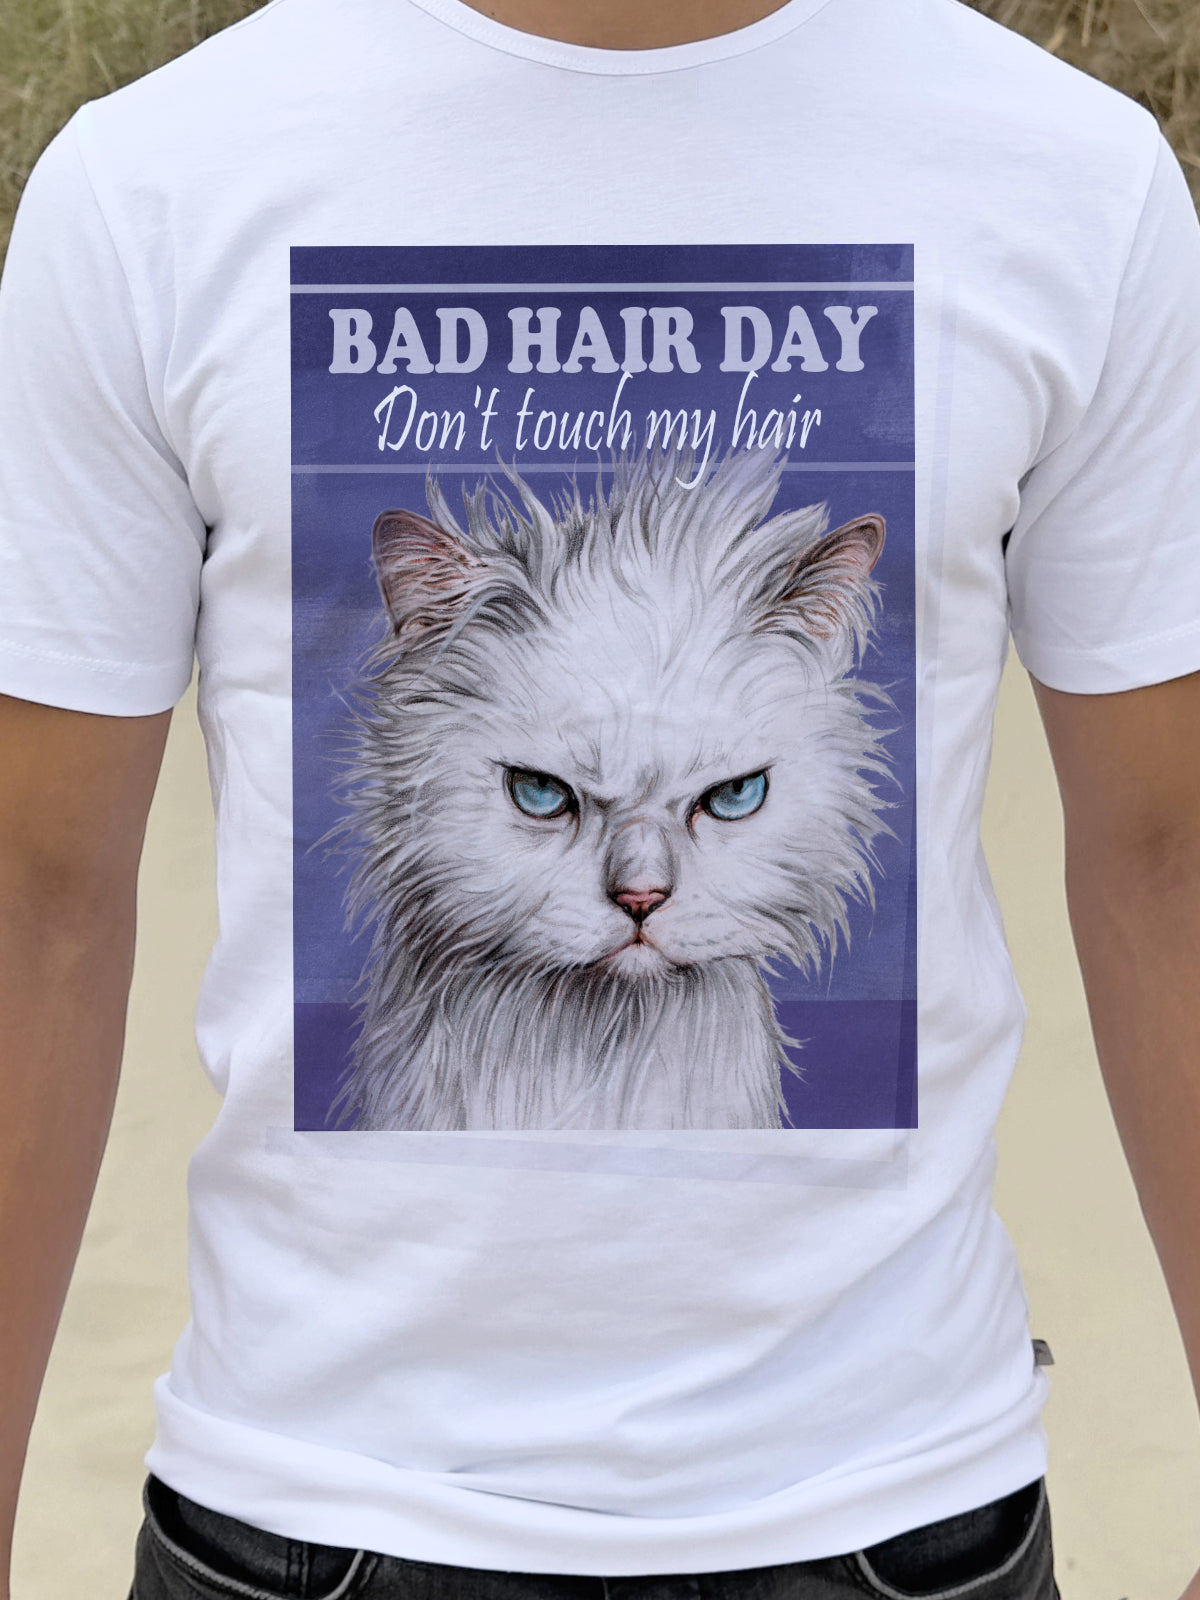 T-shirt "Bad Hair Day - Don't touch my hair".